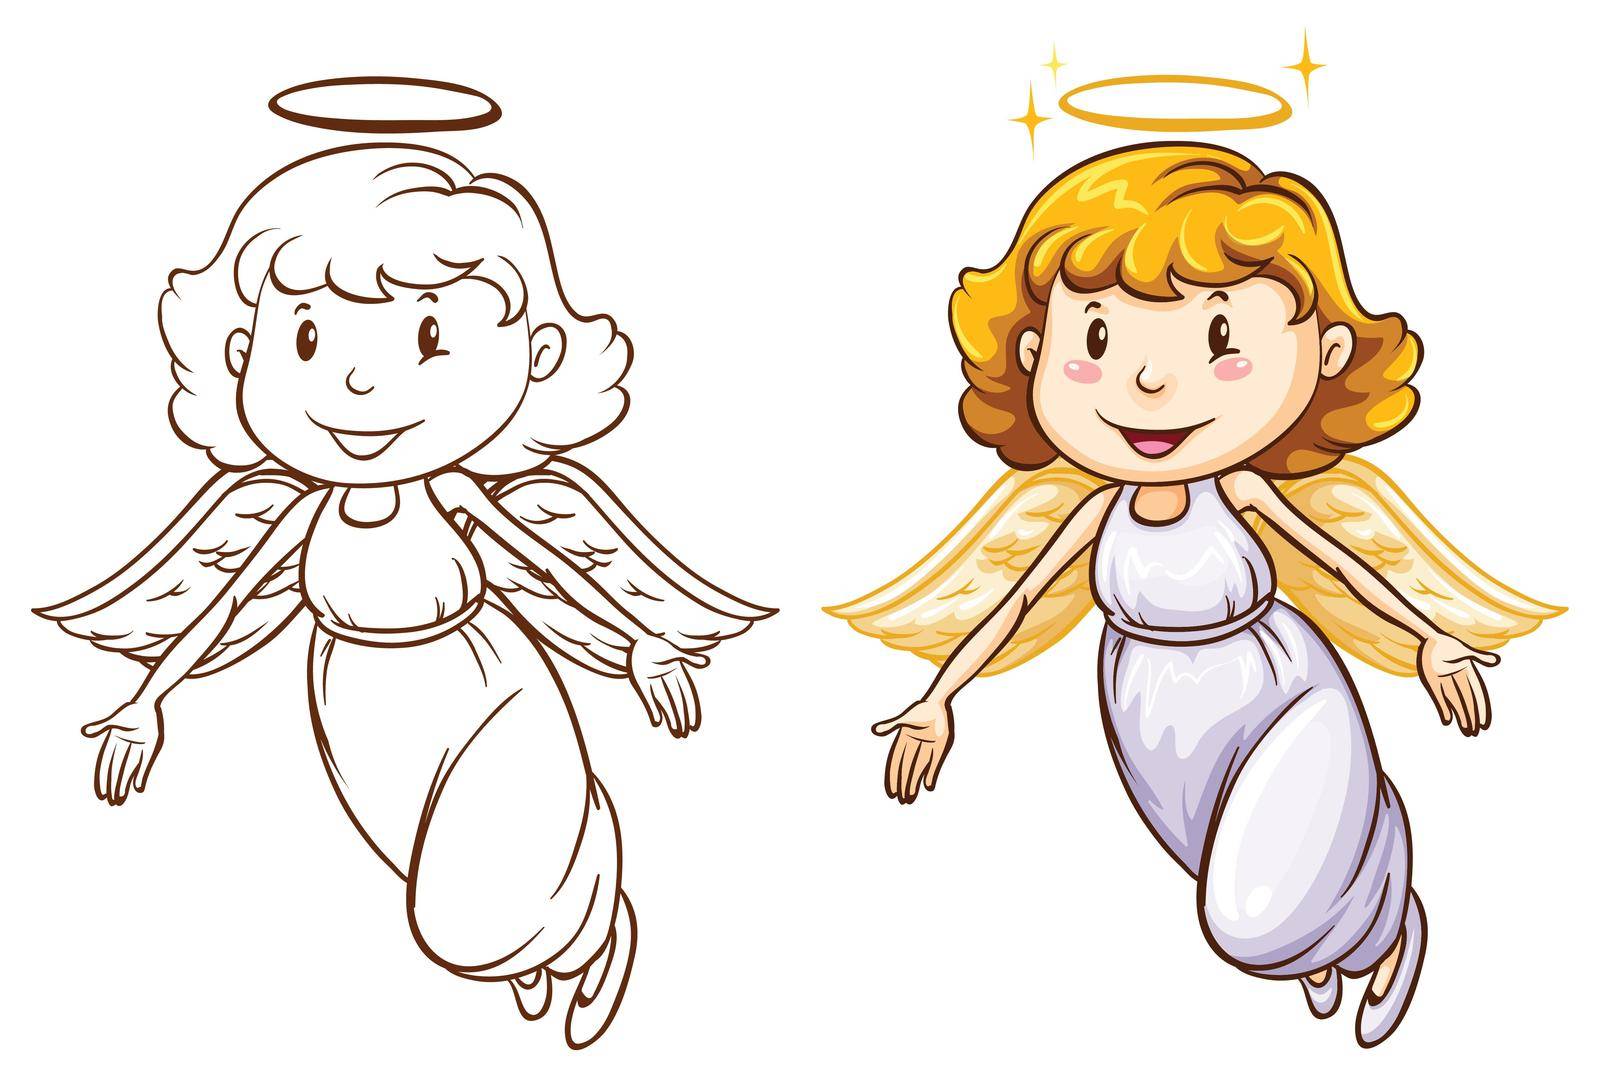 Sketches of angels in different colors by iimages